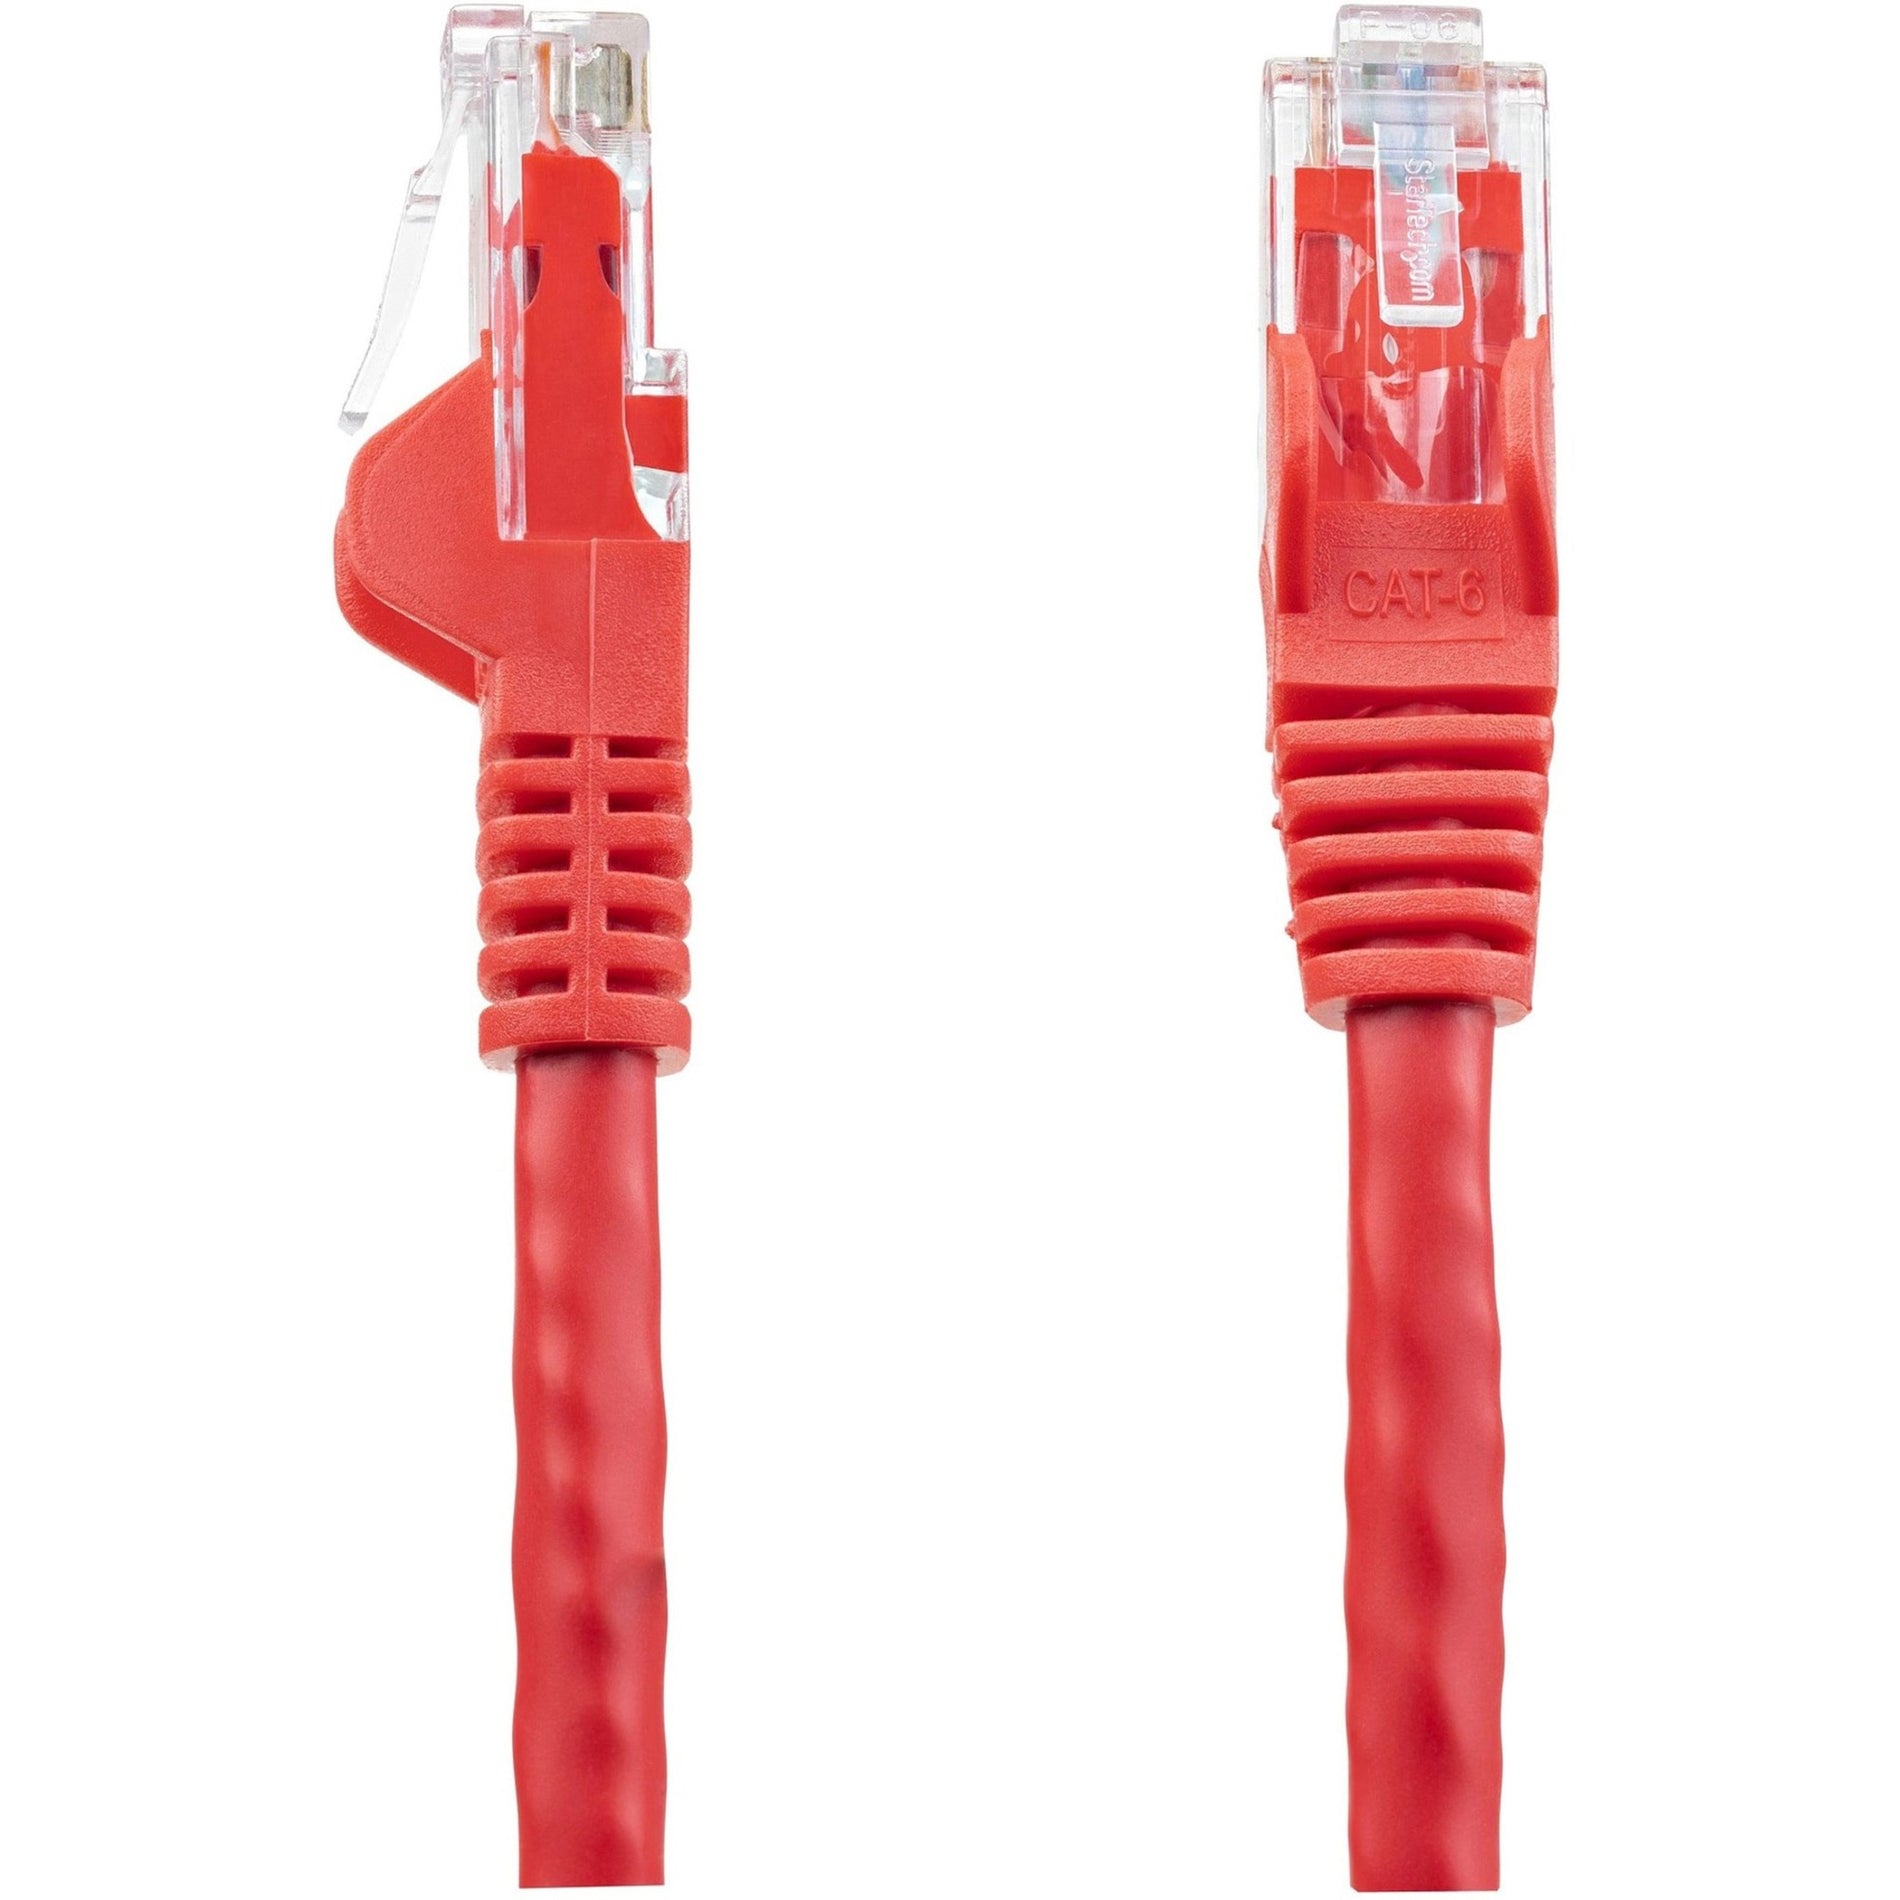 StarTech.com N6PATCH14RD Cat6 Patch Cable, 14ft Red Ethernet Cable, Snagless RJ45 Connectors